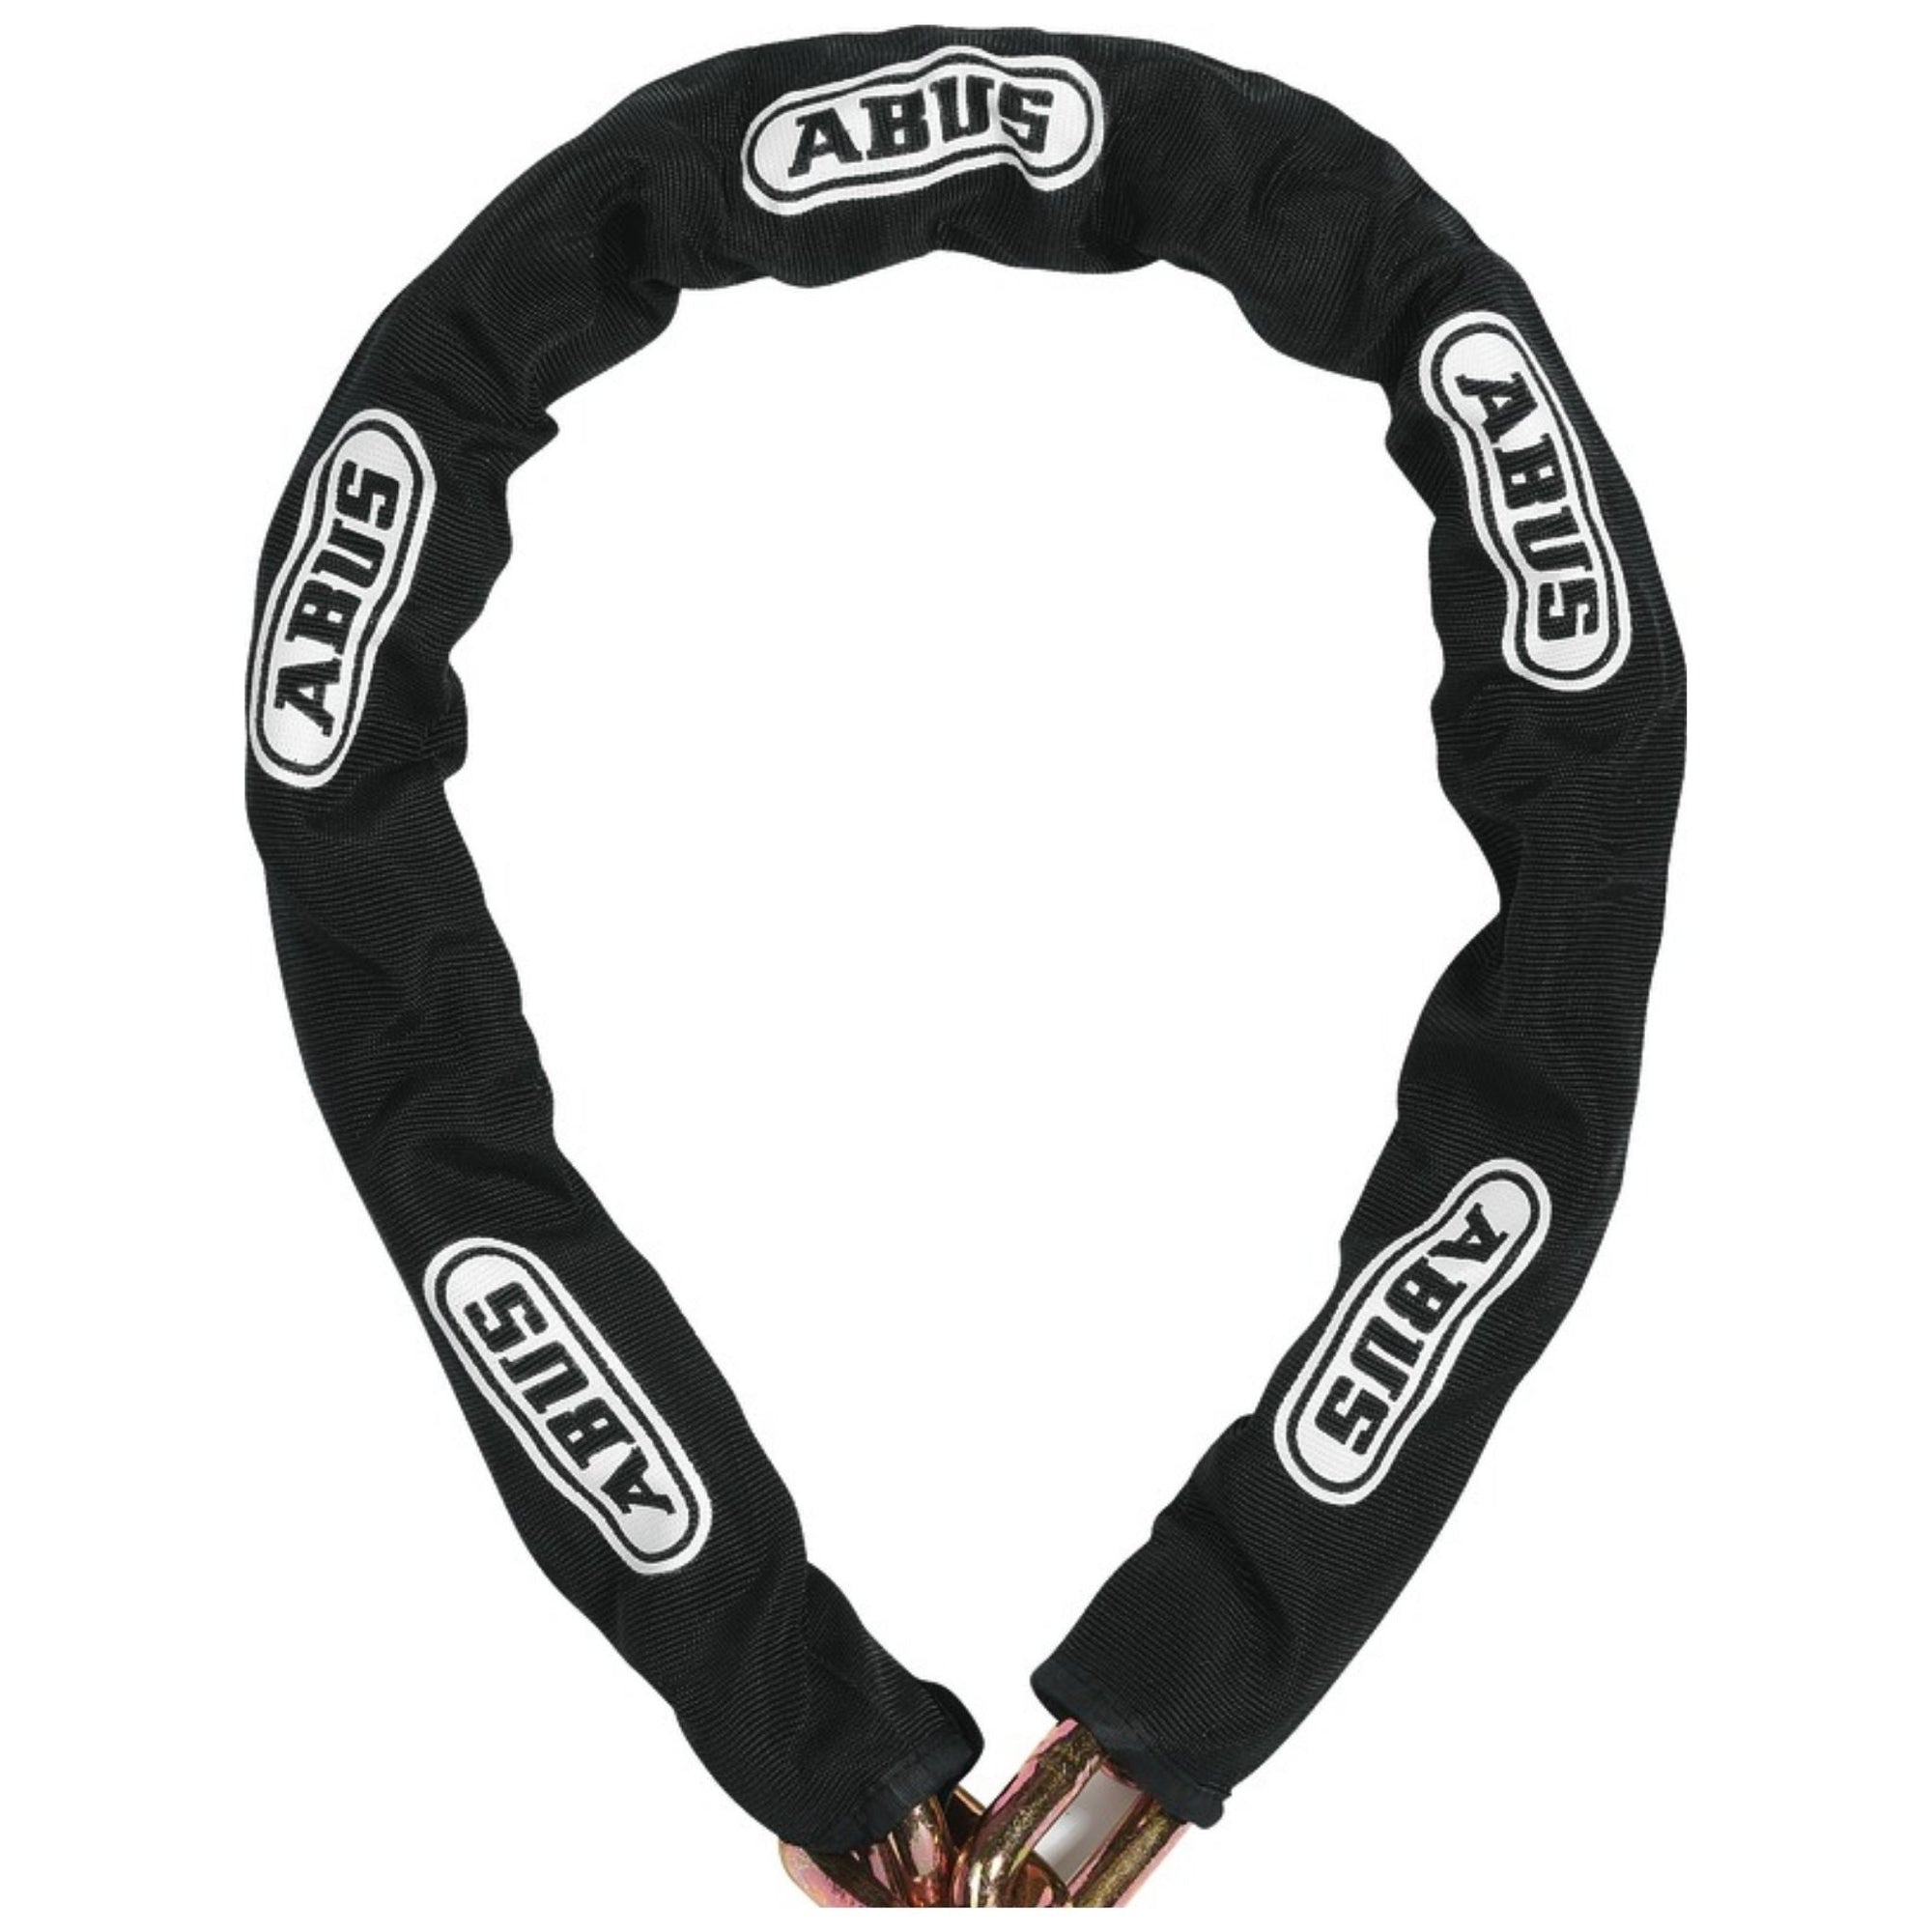 Abus 14KS (9/16" Thick) 4-Foot Pre-Cut Chain with Fitted Nylon Sleeve - The Lock Source